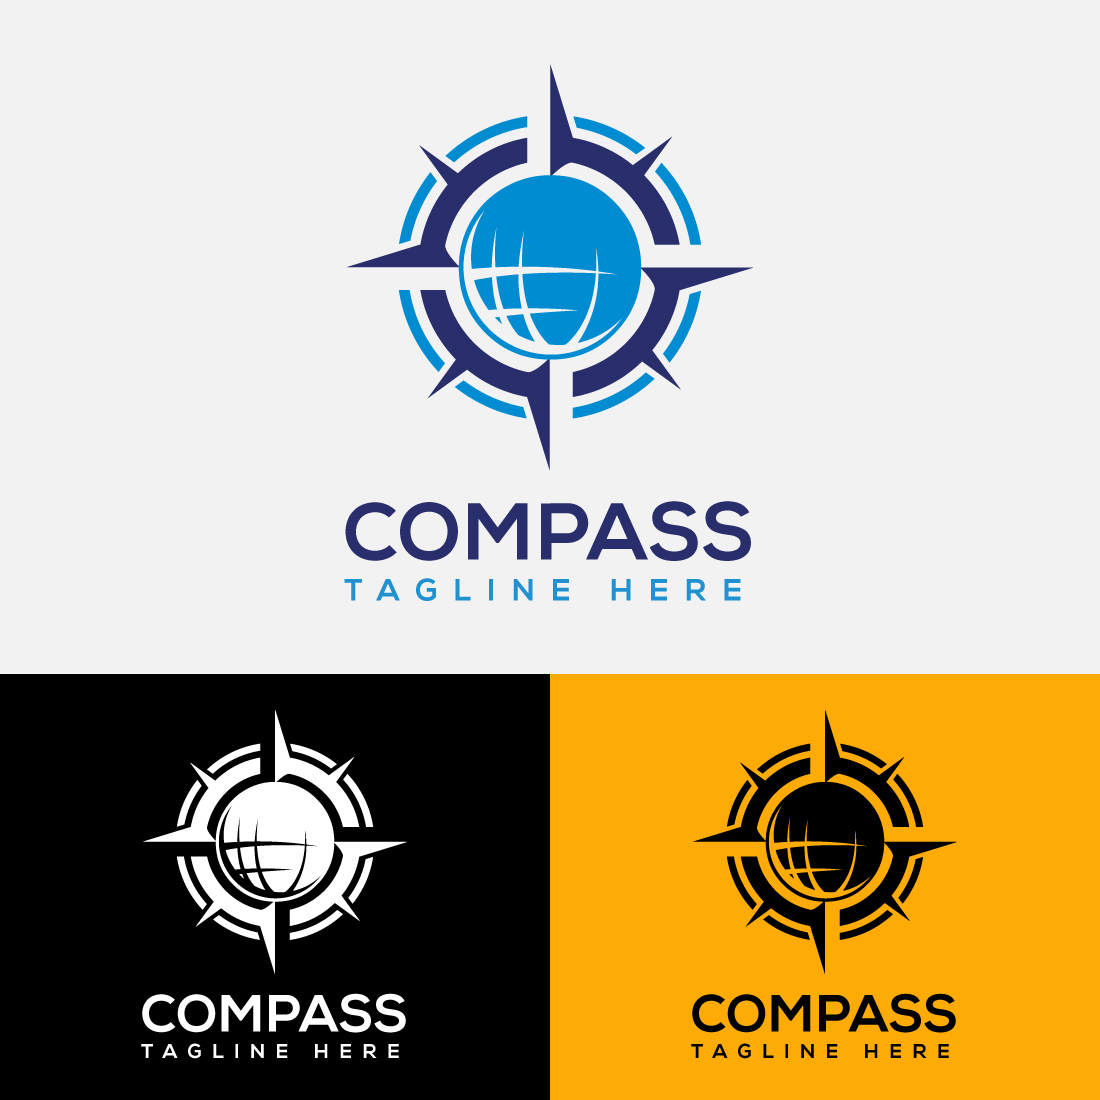 Set of images of gorgeous compass logos.